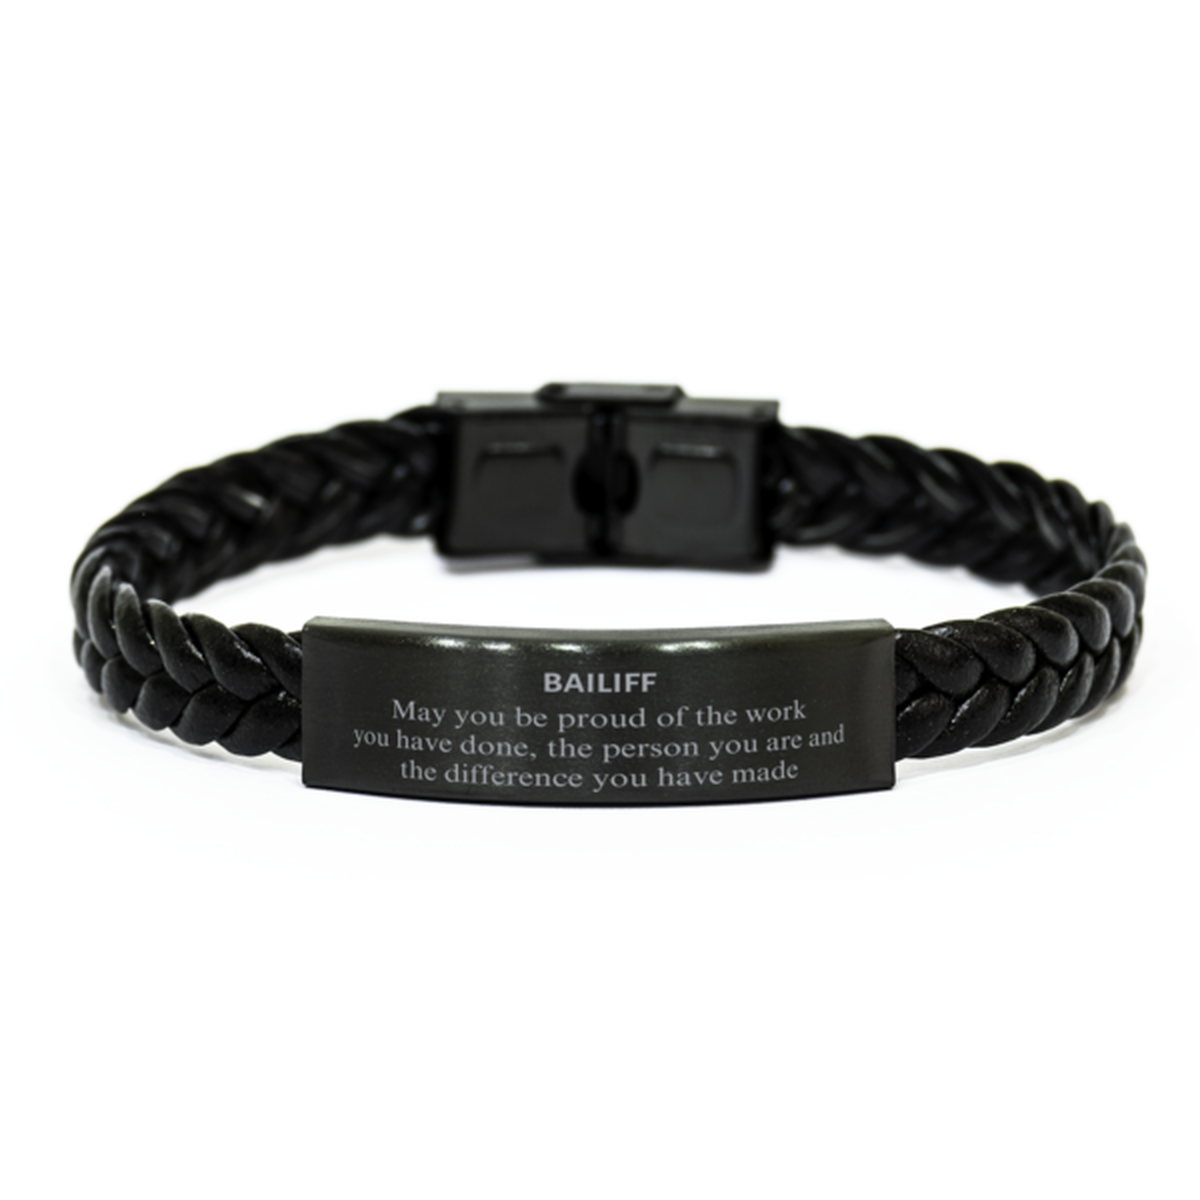 Bailiff May you be proud of the work you have done, Retirement Bailiff Braided Leather Bracelet for Colleague Appreciation Gifts Amazing for Bailiff